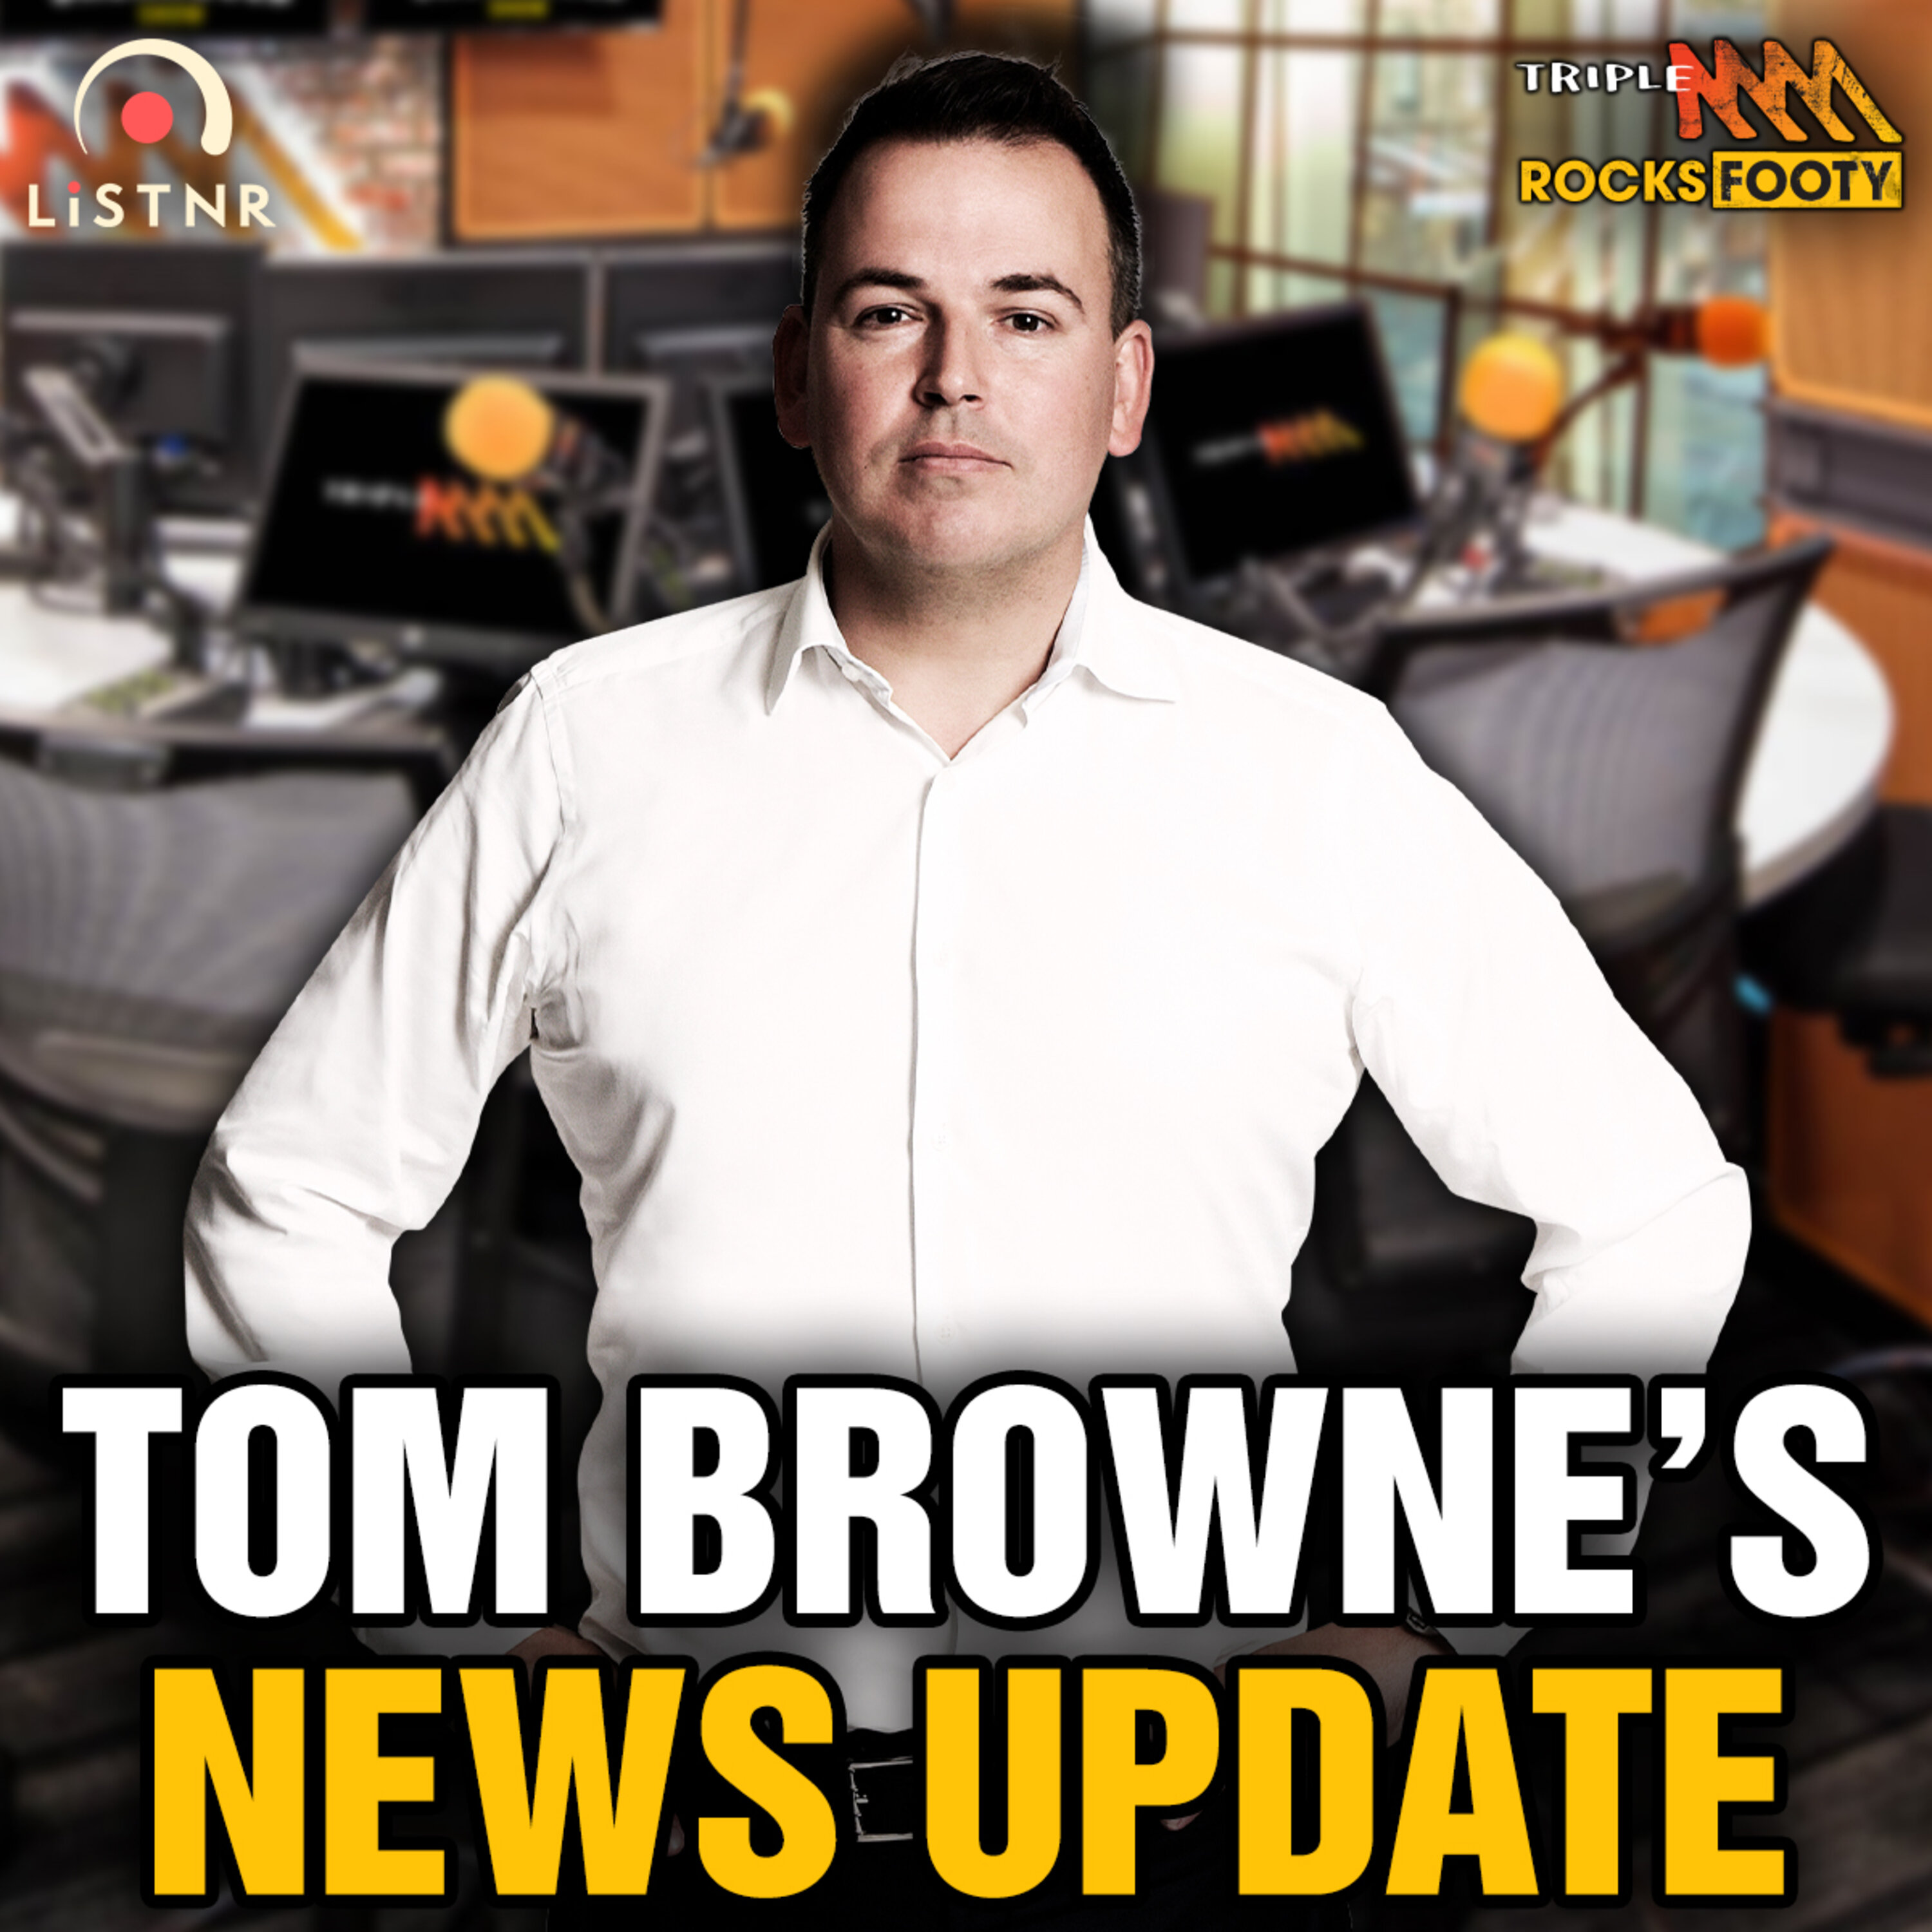 Tom Browne's News | Further details and response to Hawthorn allegations, selection heartbreak for young Swan, Jordan de Goey's future